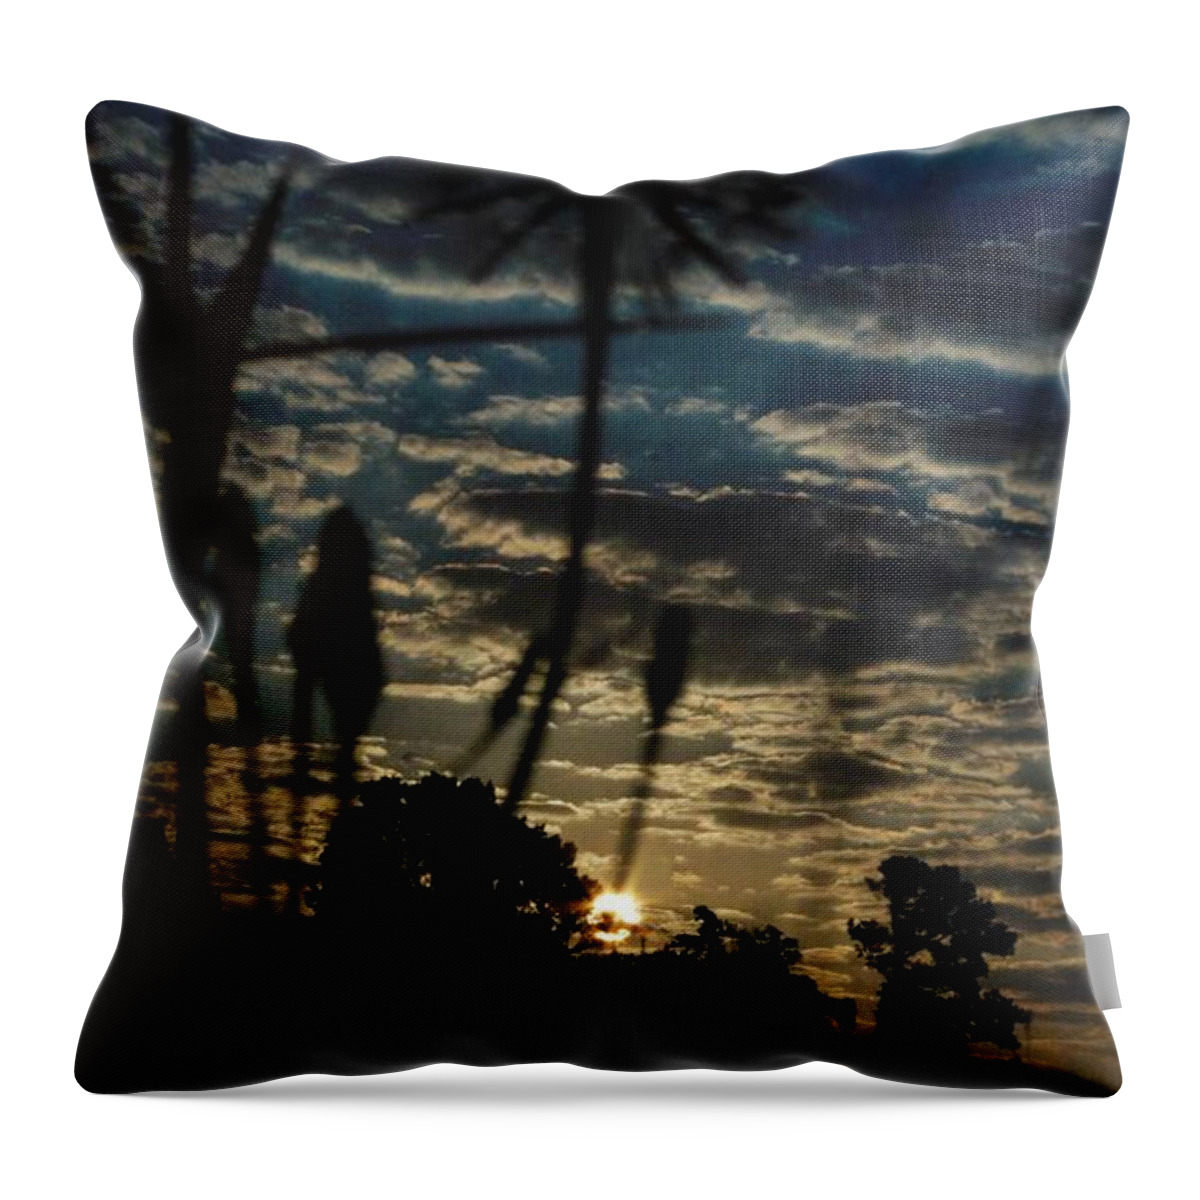 Dandilion Throw Pillow featuring the photograph Good Day Sunshine by John Glass